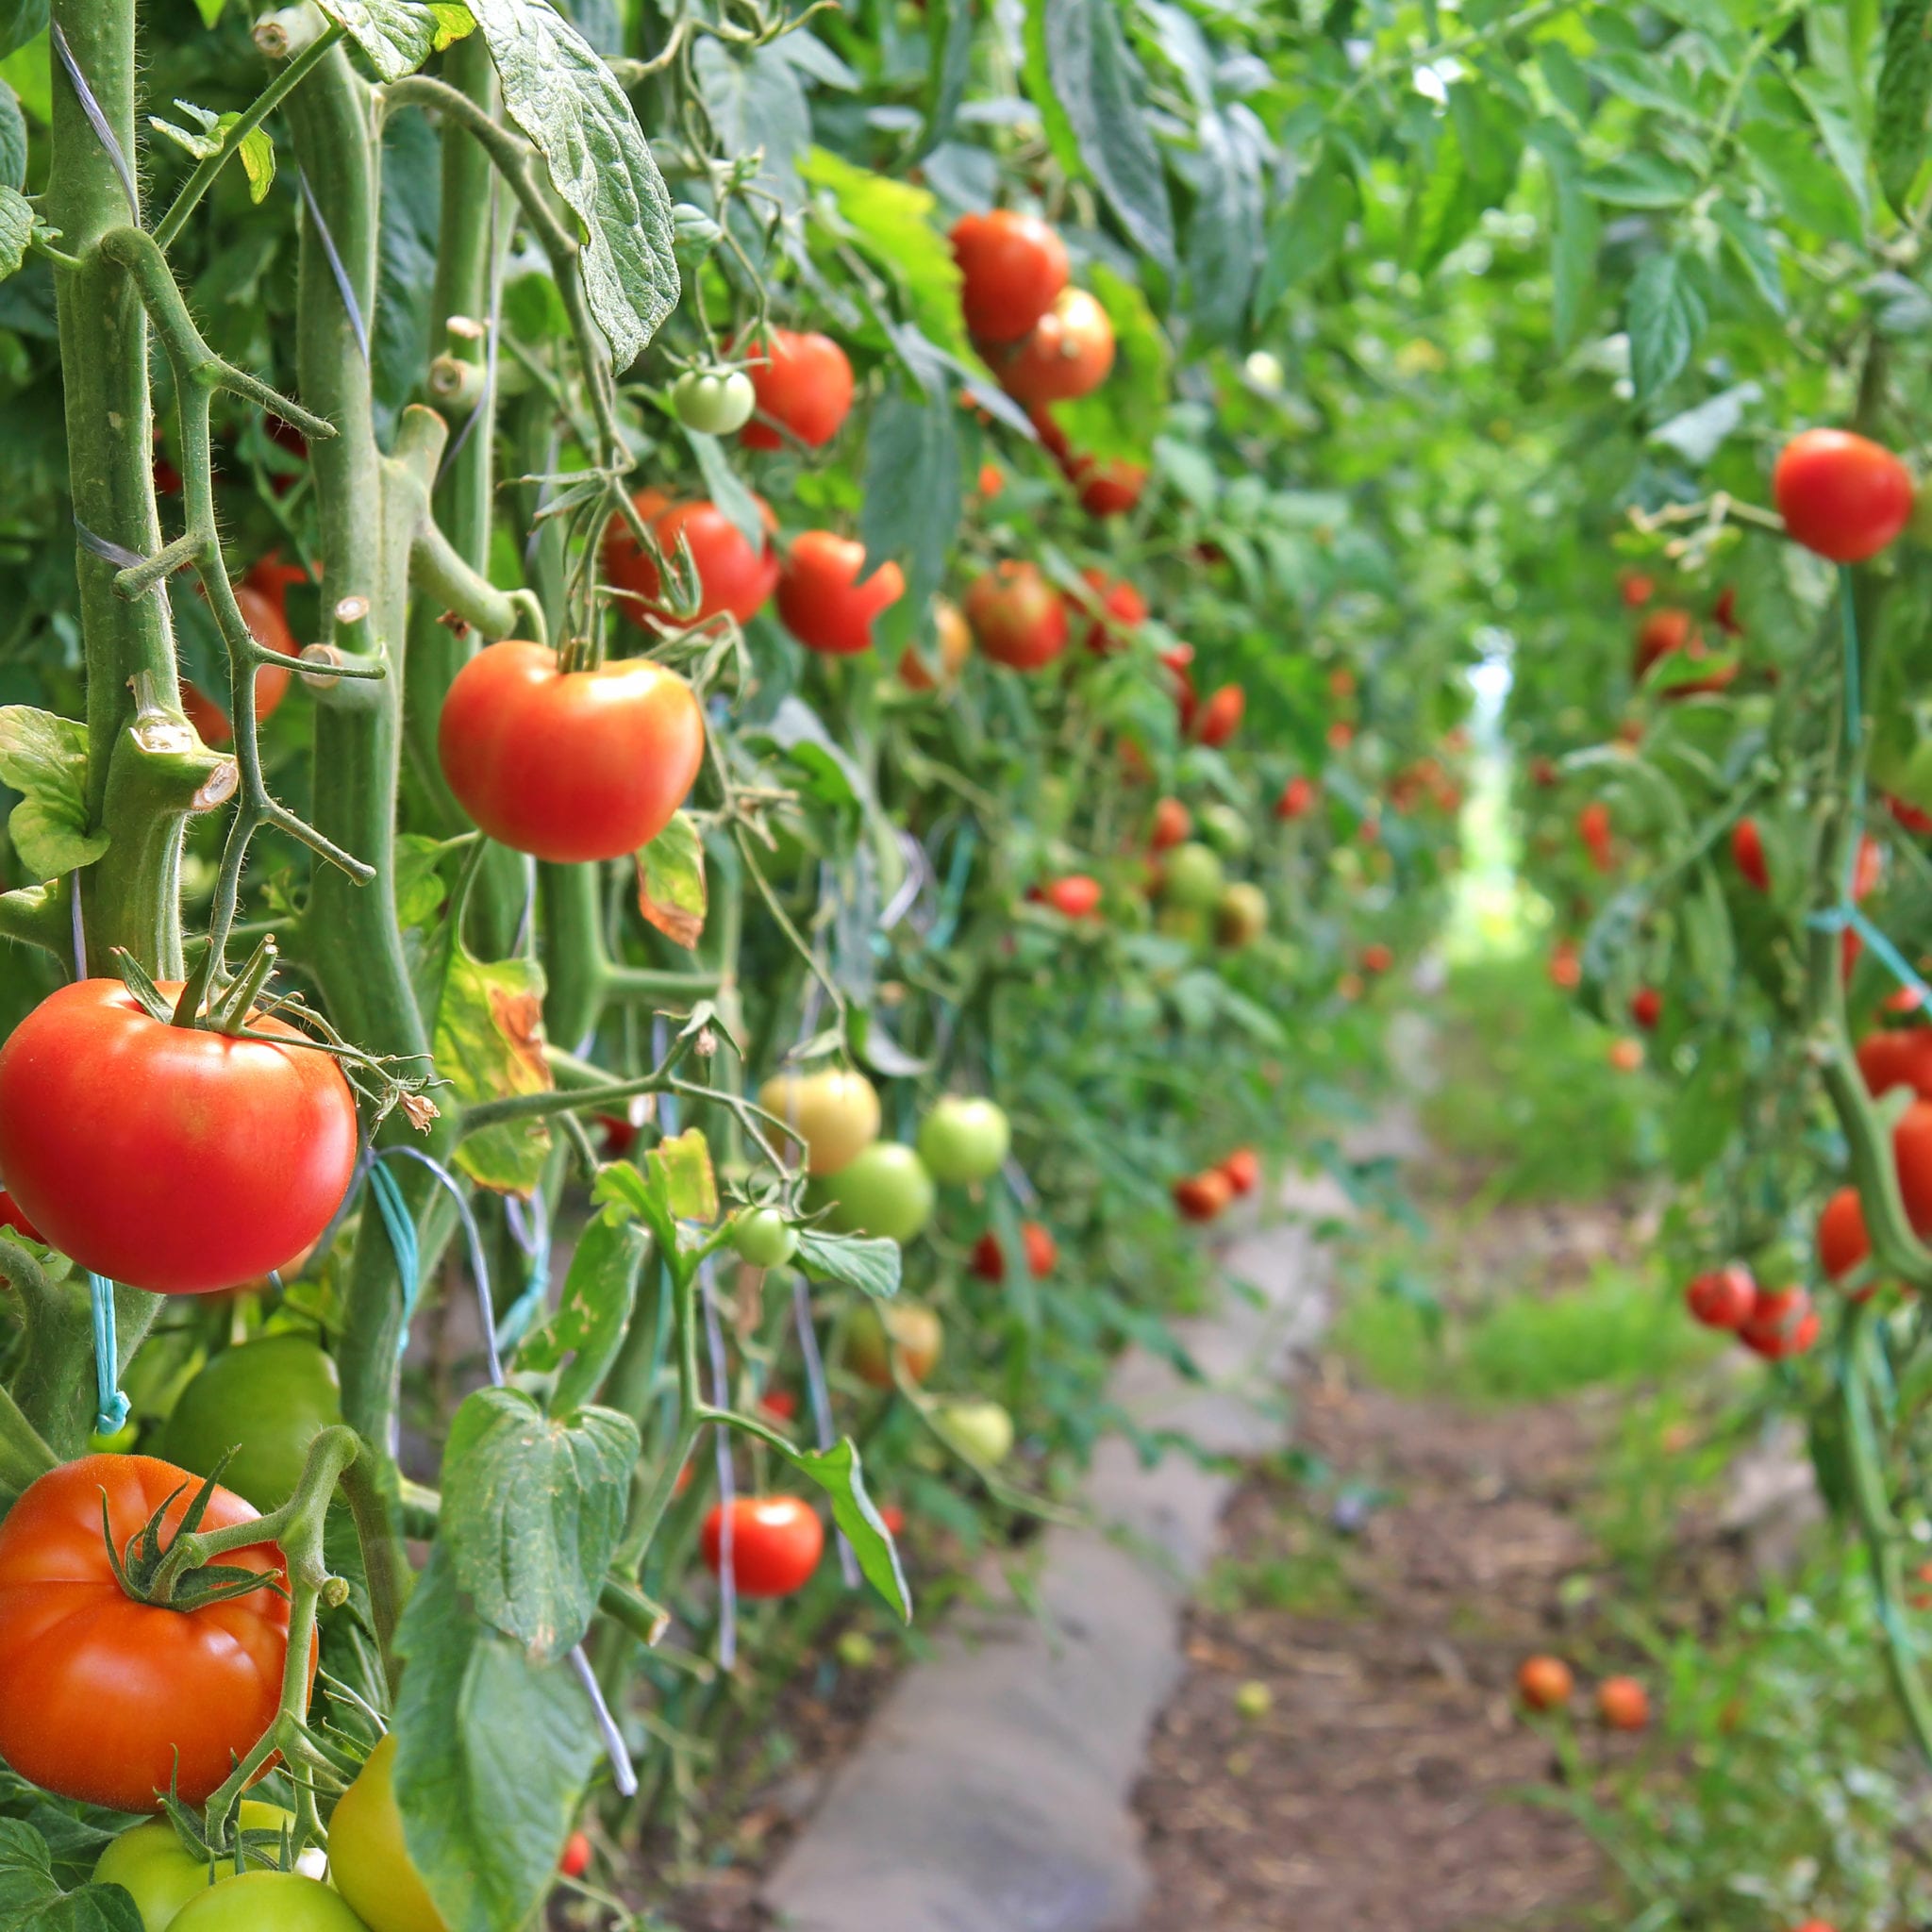 Ripe Tomato In A Greenhouse, Ready For Picking